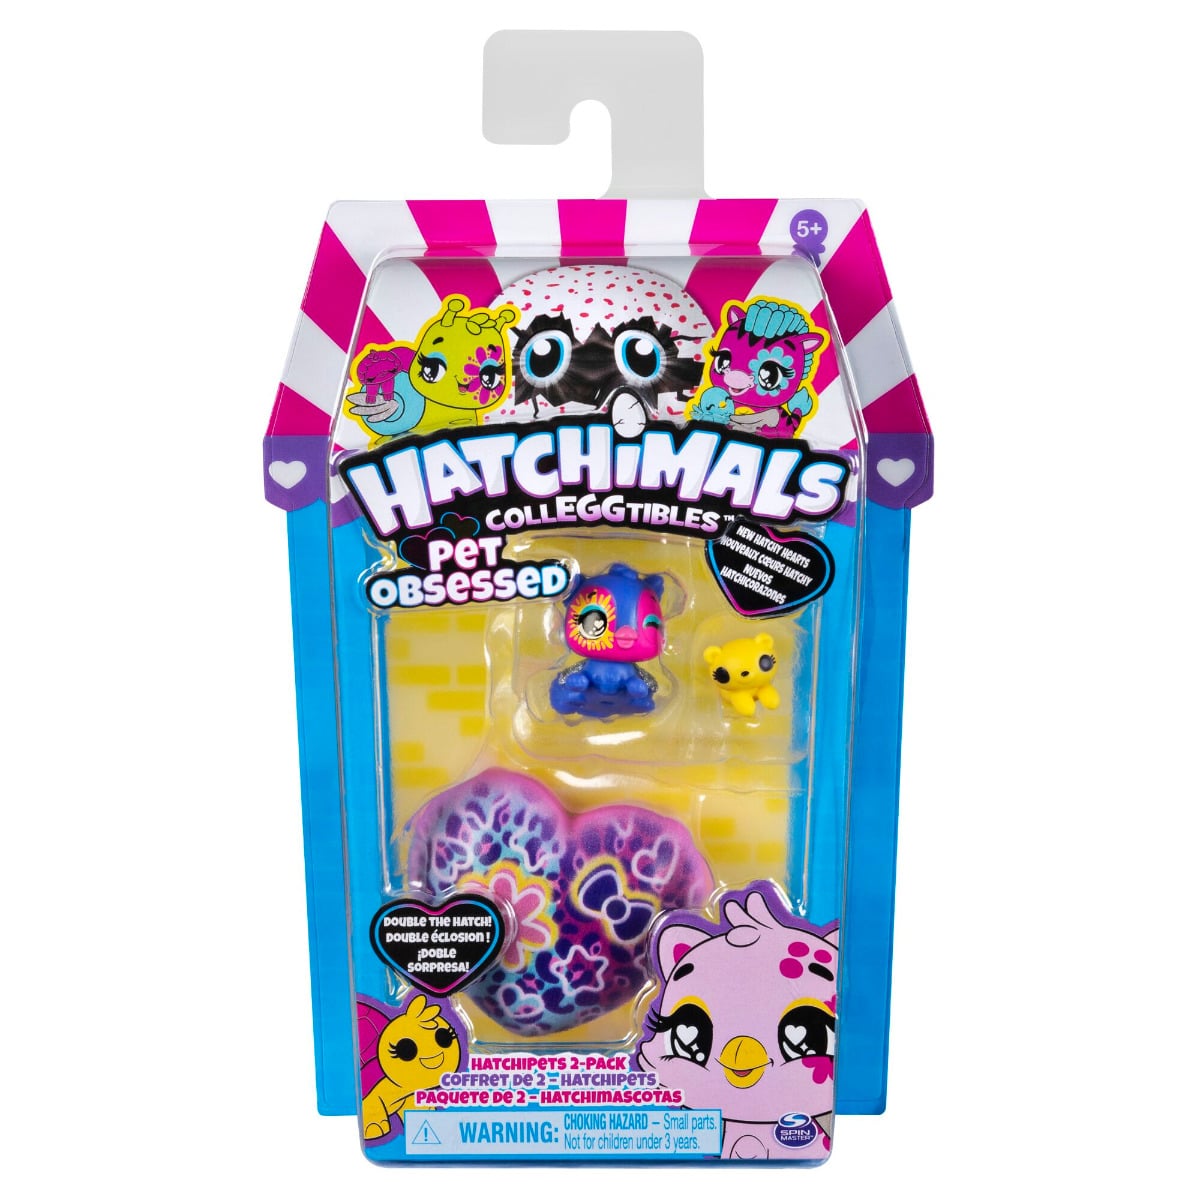 Hatchimals ColleGGtibles Pet Obsessed